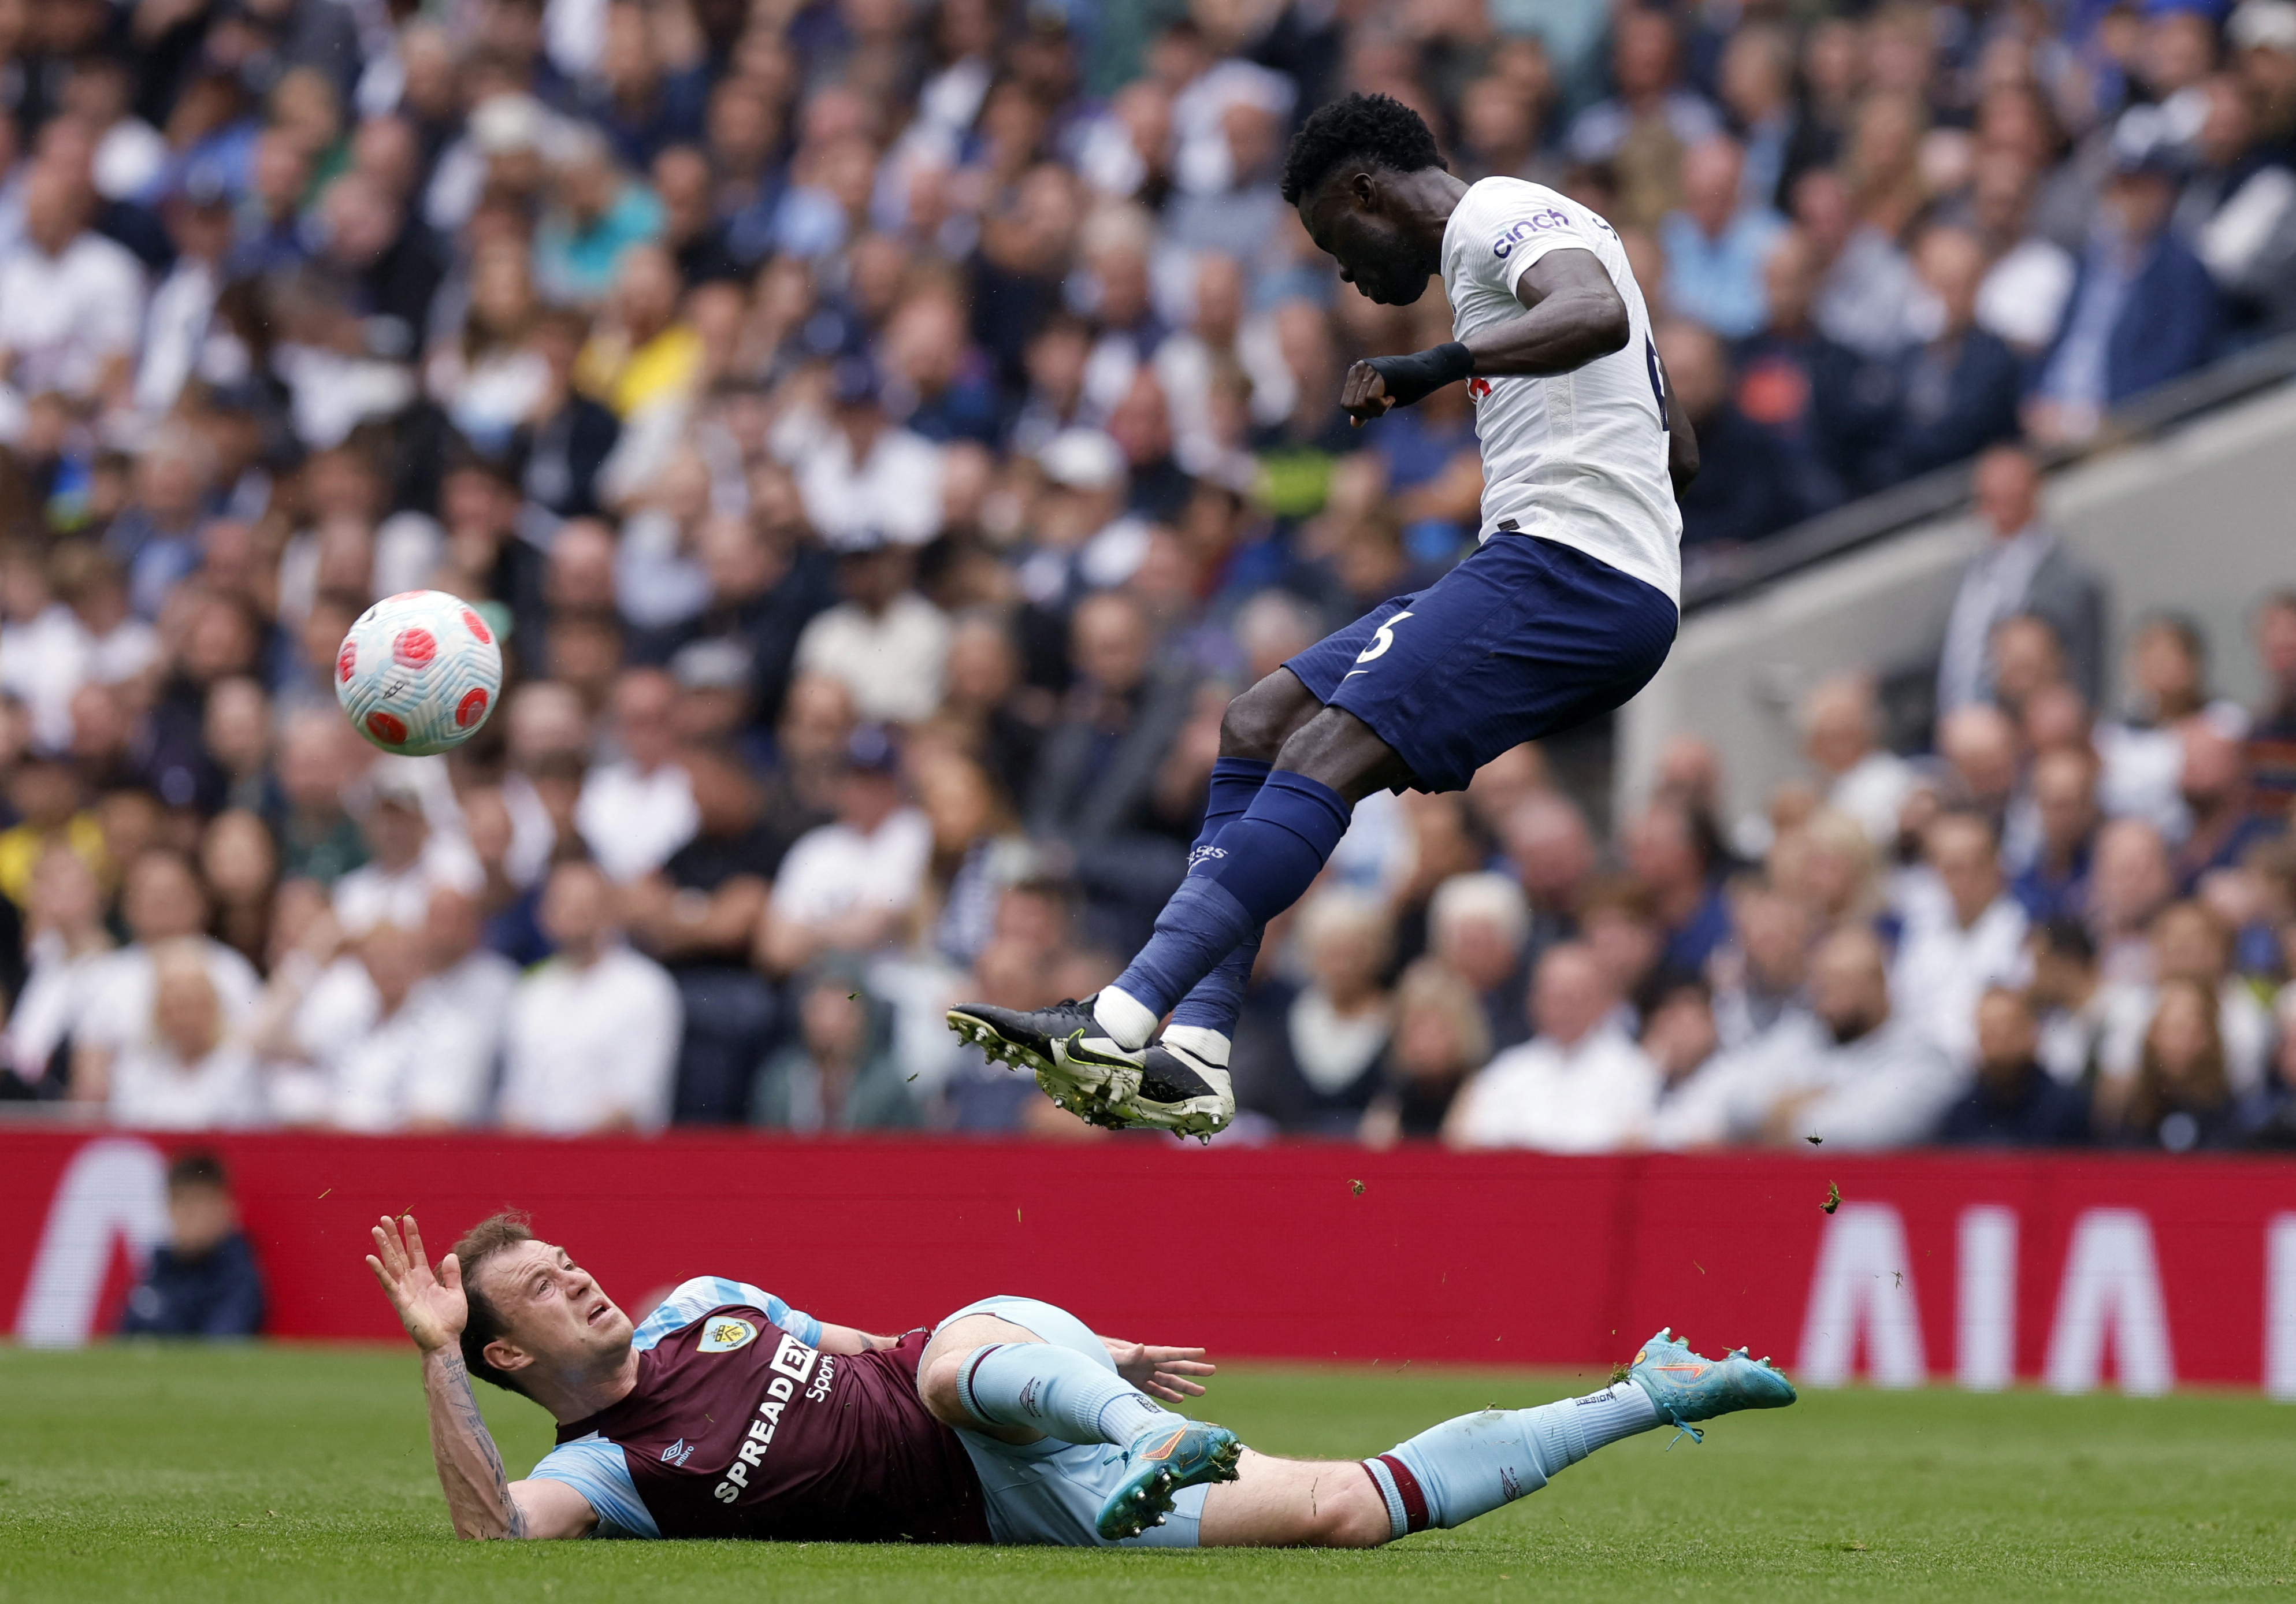 Soccer Football - Premier League - Tottenham Hotspur v Burnley - Tottenham Hotspur Stadium, London, Britain - May 15, 2022 Burnley's Ashley Barnes in action with Tottenham Hotspur's Davinson Sanchez Action Images via Reuters/Andrew Couldridge EDITORIAL USE ONLY. No use with unauthorized audio, video, data, fixture lists, club/league logos or 'live' services. Online in-match use limited to 75 images, no video emulation. No use in betting, games or single club /league/player publications.  Please contact your account representative for further details.